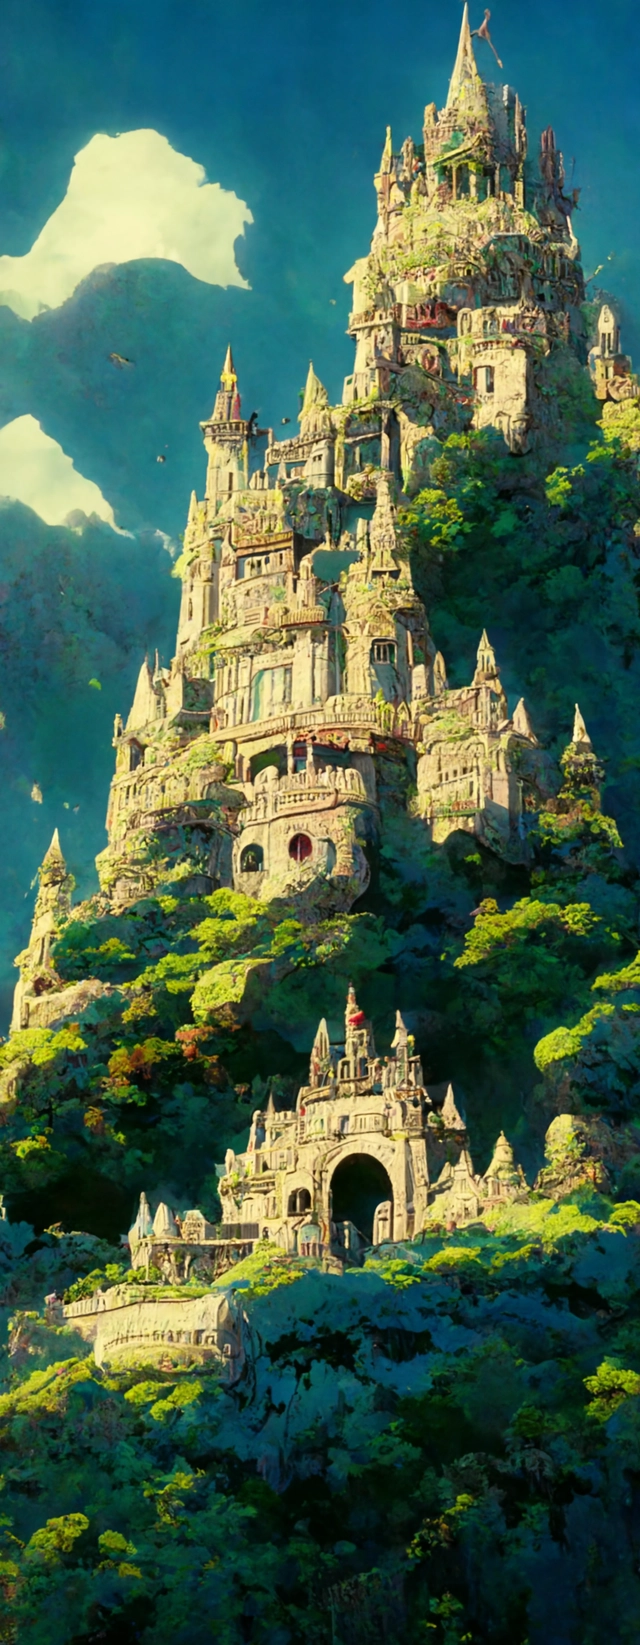 An imposing and highly ornamented fantasy castle, Carved from Sapphire stone, Atmosphere, Dramatic lighting, Beautiful Landscape, Epic composition, Wide angle, by Miyazaki, Nausicaa Ghibli, Breath of The Wild